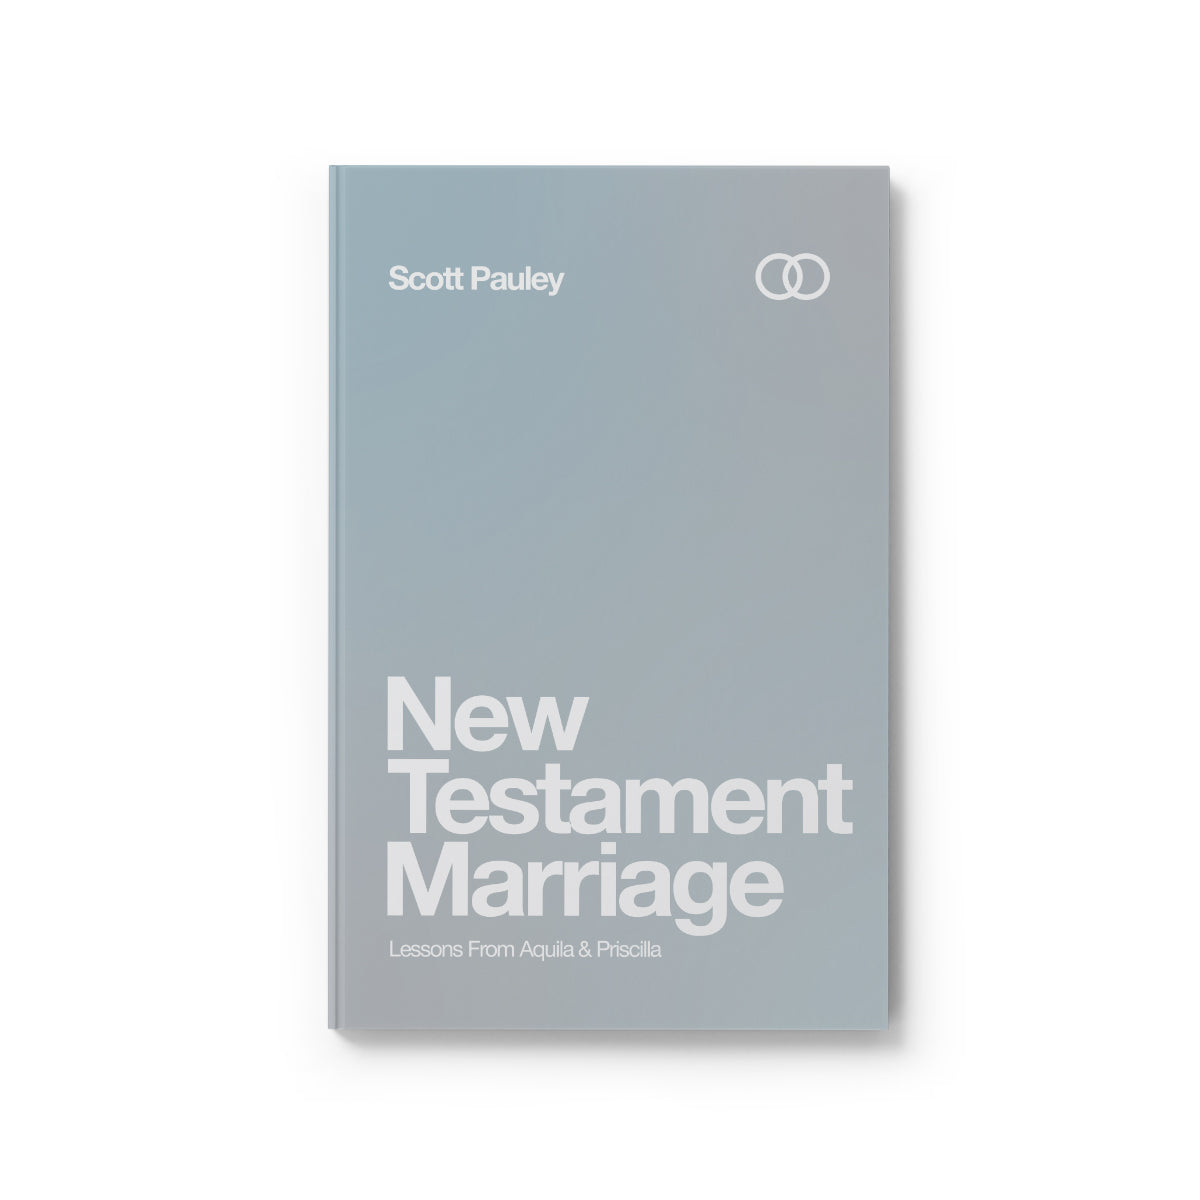 New Testament Marriage: Lessons From Aquila & Priscilla by Scott Pauley